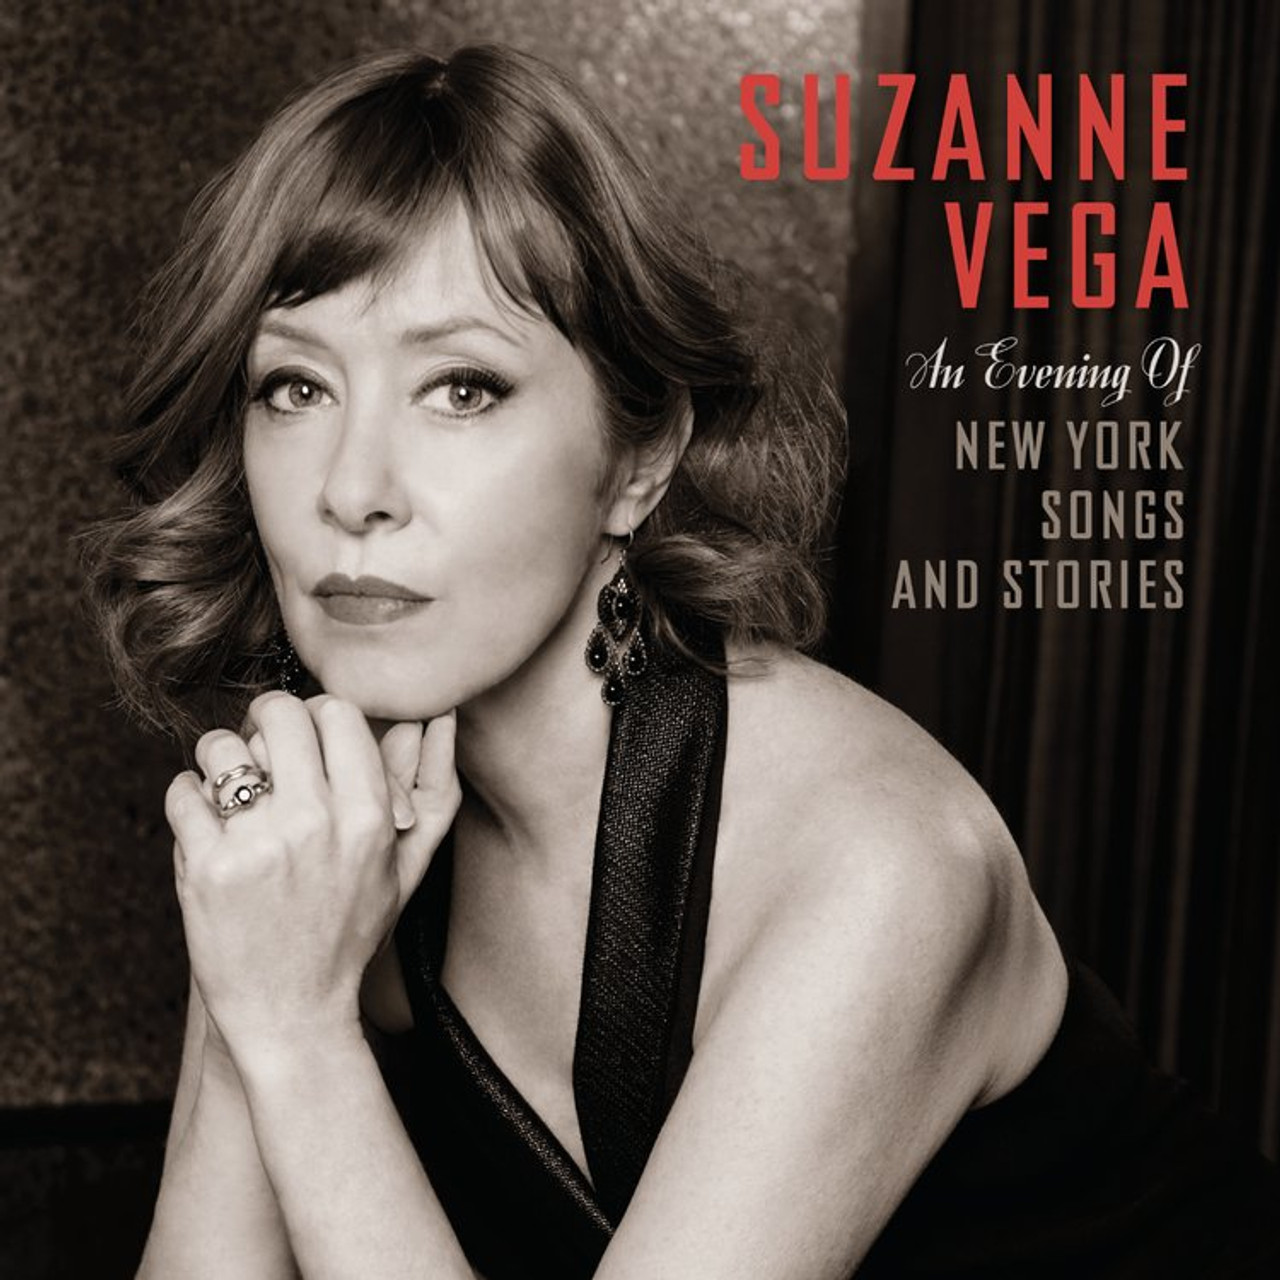 Pop-Rock Tape  Suzanne Vega: An Evening Of New York Songs And Stories - 2x  Plastic Reel 1/4 19cm/s (7.5ips), LPR90, Horch House HH04.00.228, LPR90